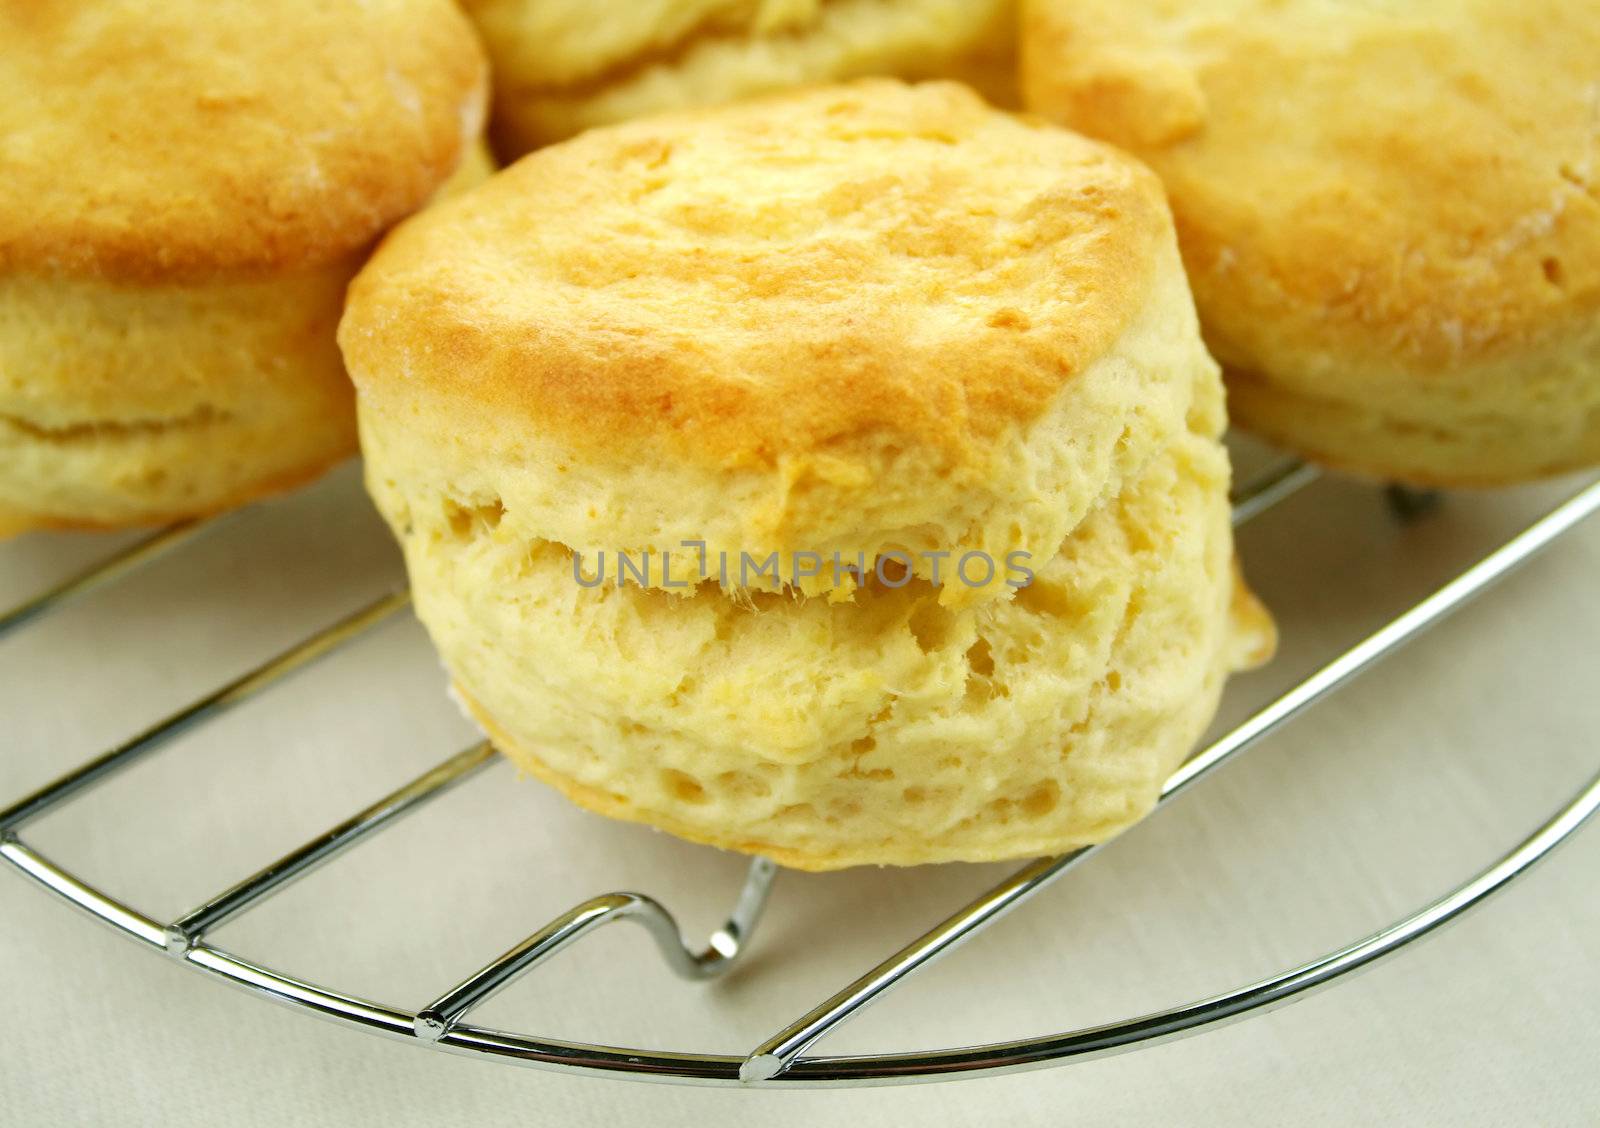 Freshly baked homemade golden scones straight from the oven to the table.